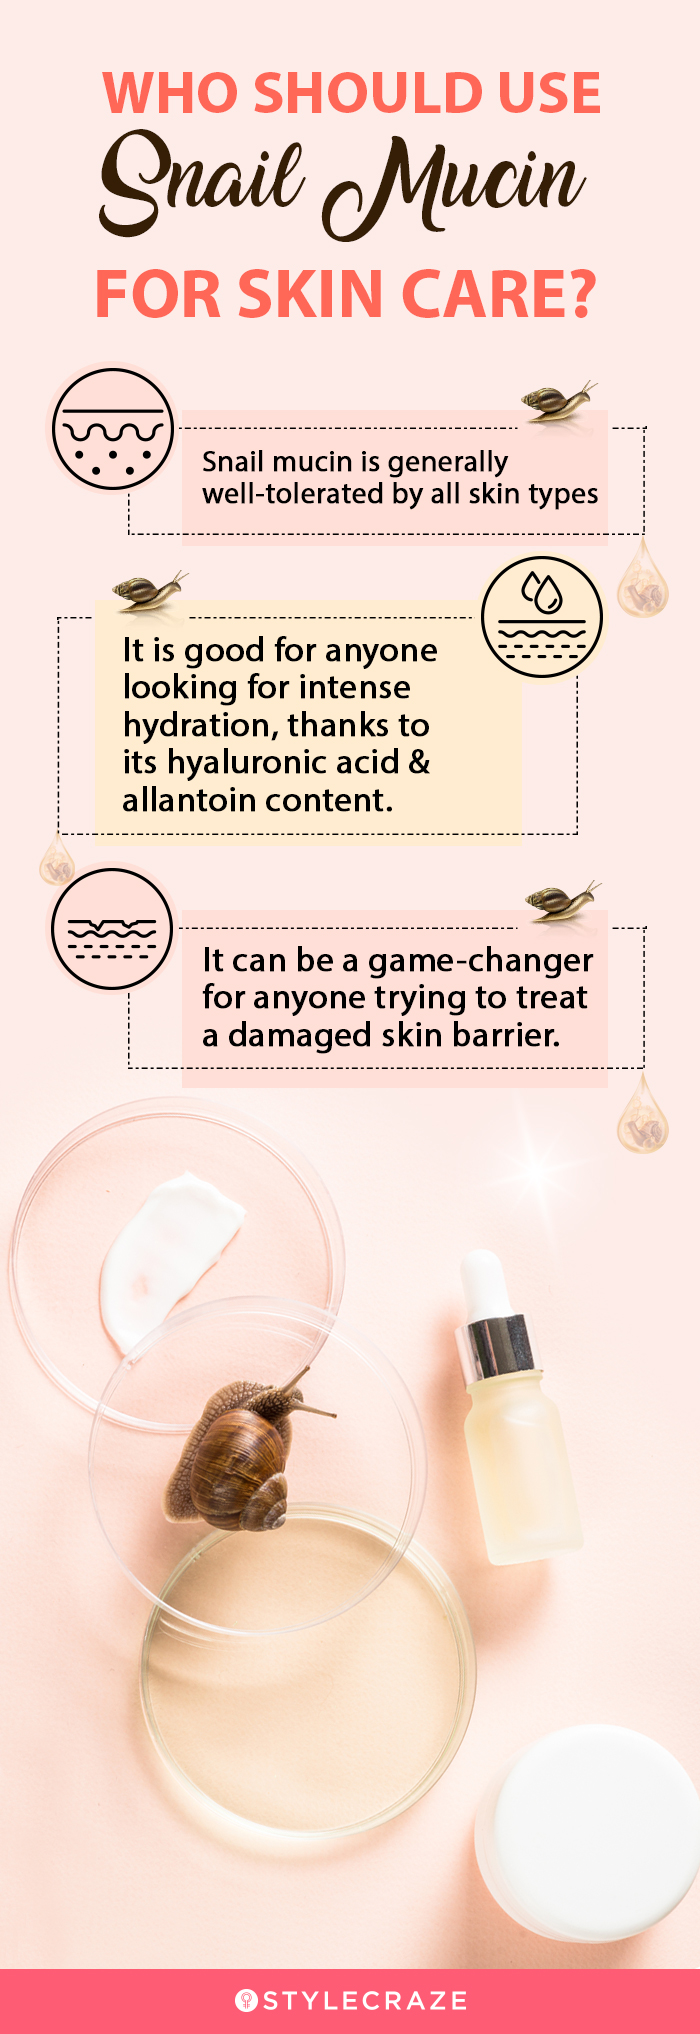 who should use snail mucin for skin care [infographic]